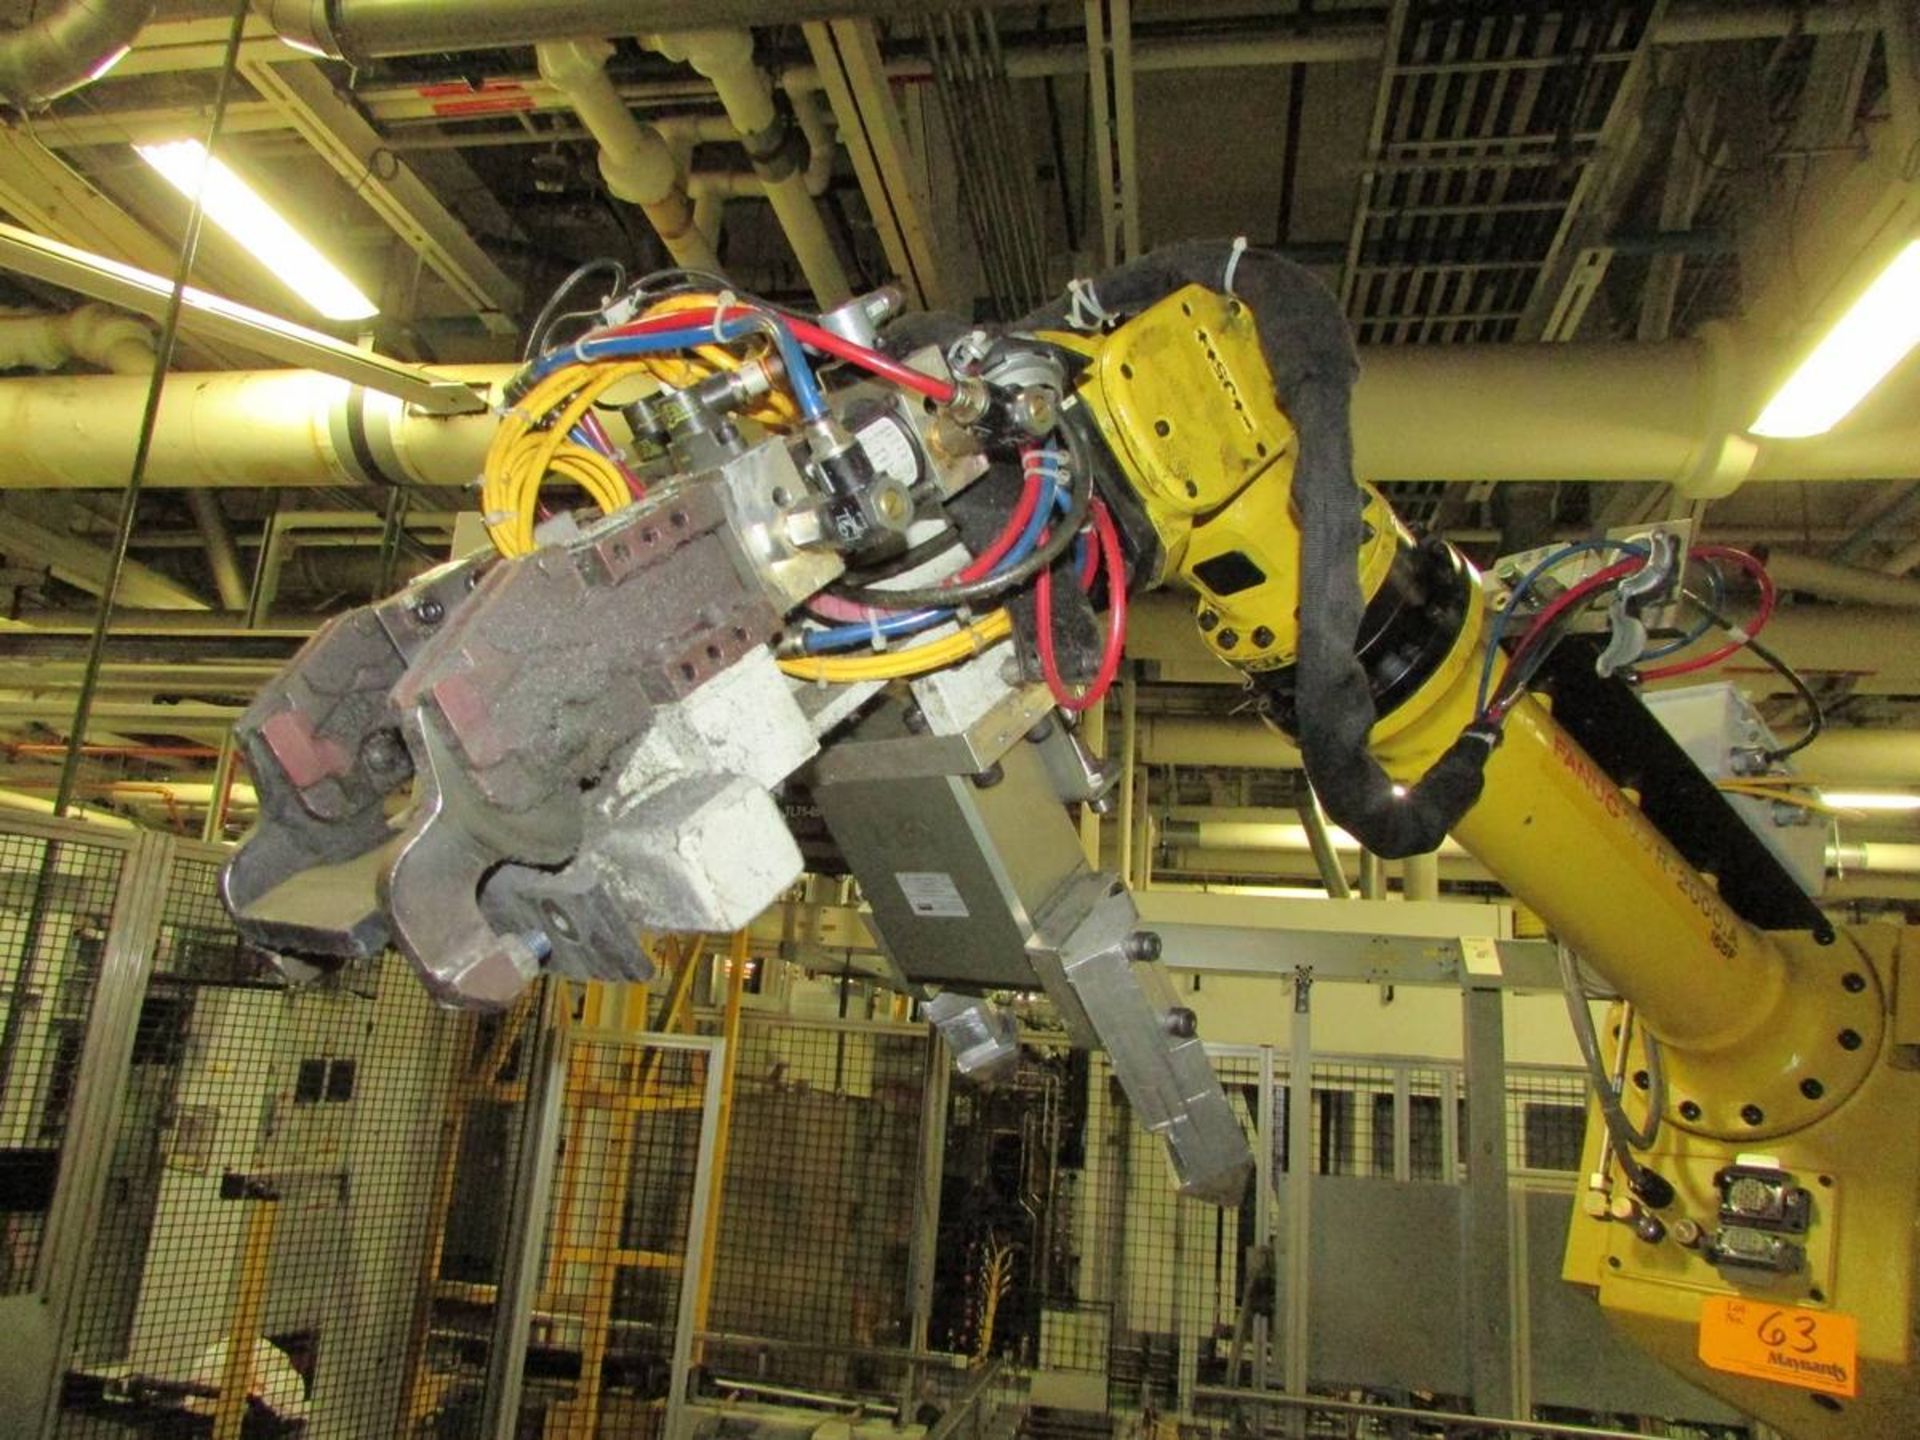 2005 Fanuc R-2000iA 165F 6 Axis Material Handling Robot - Image 3 of 8